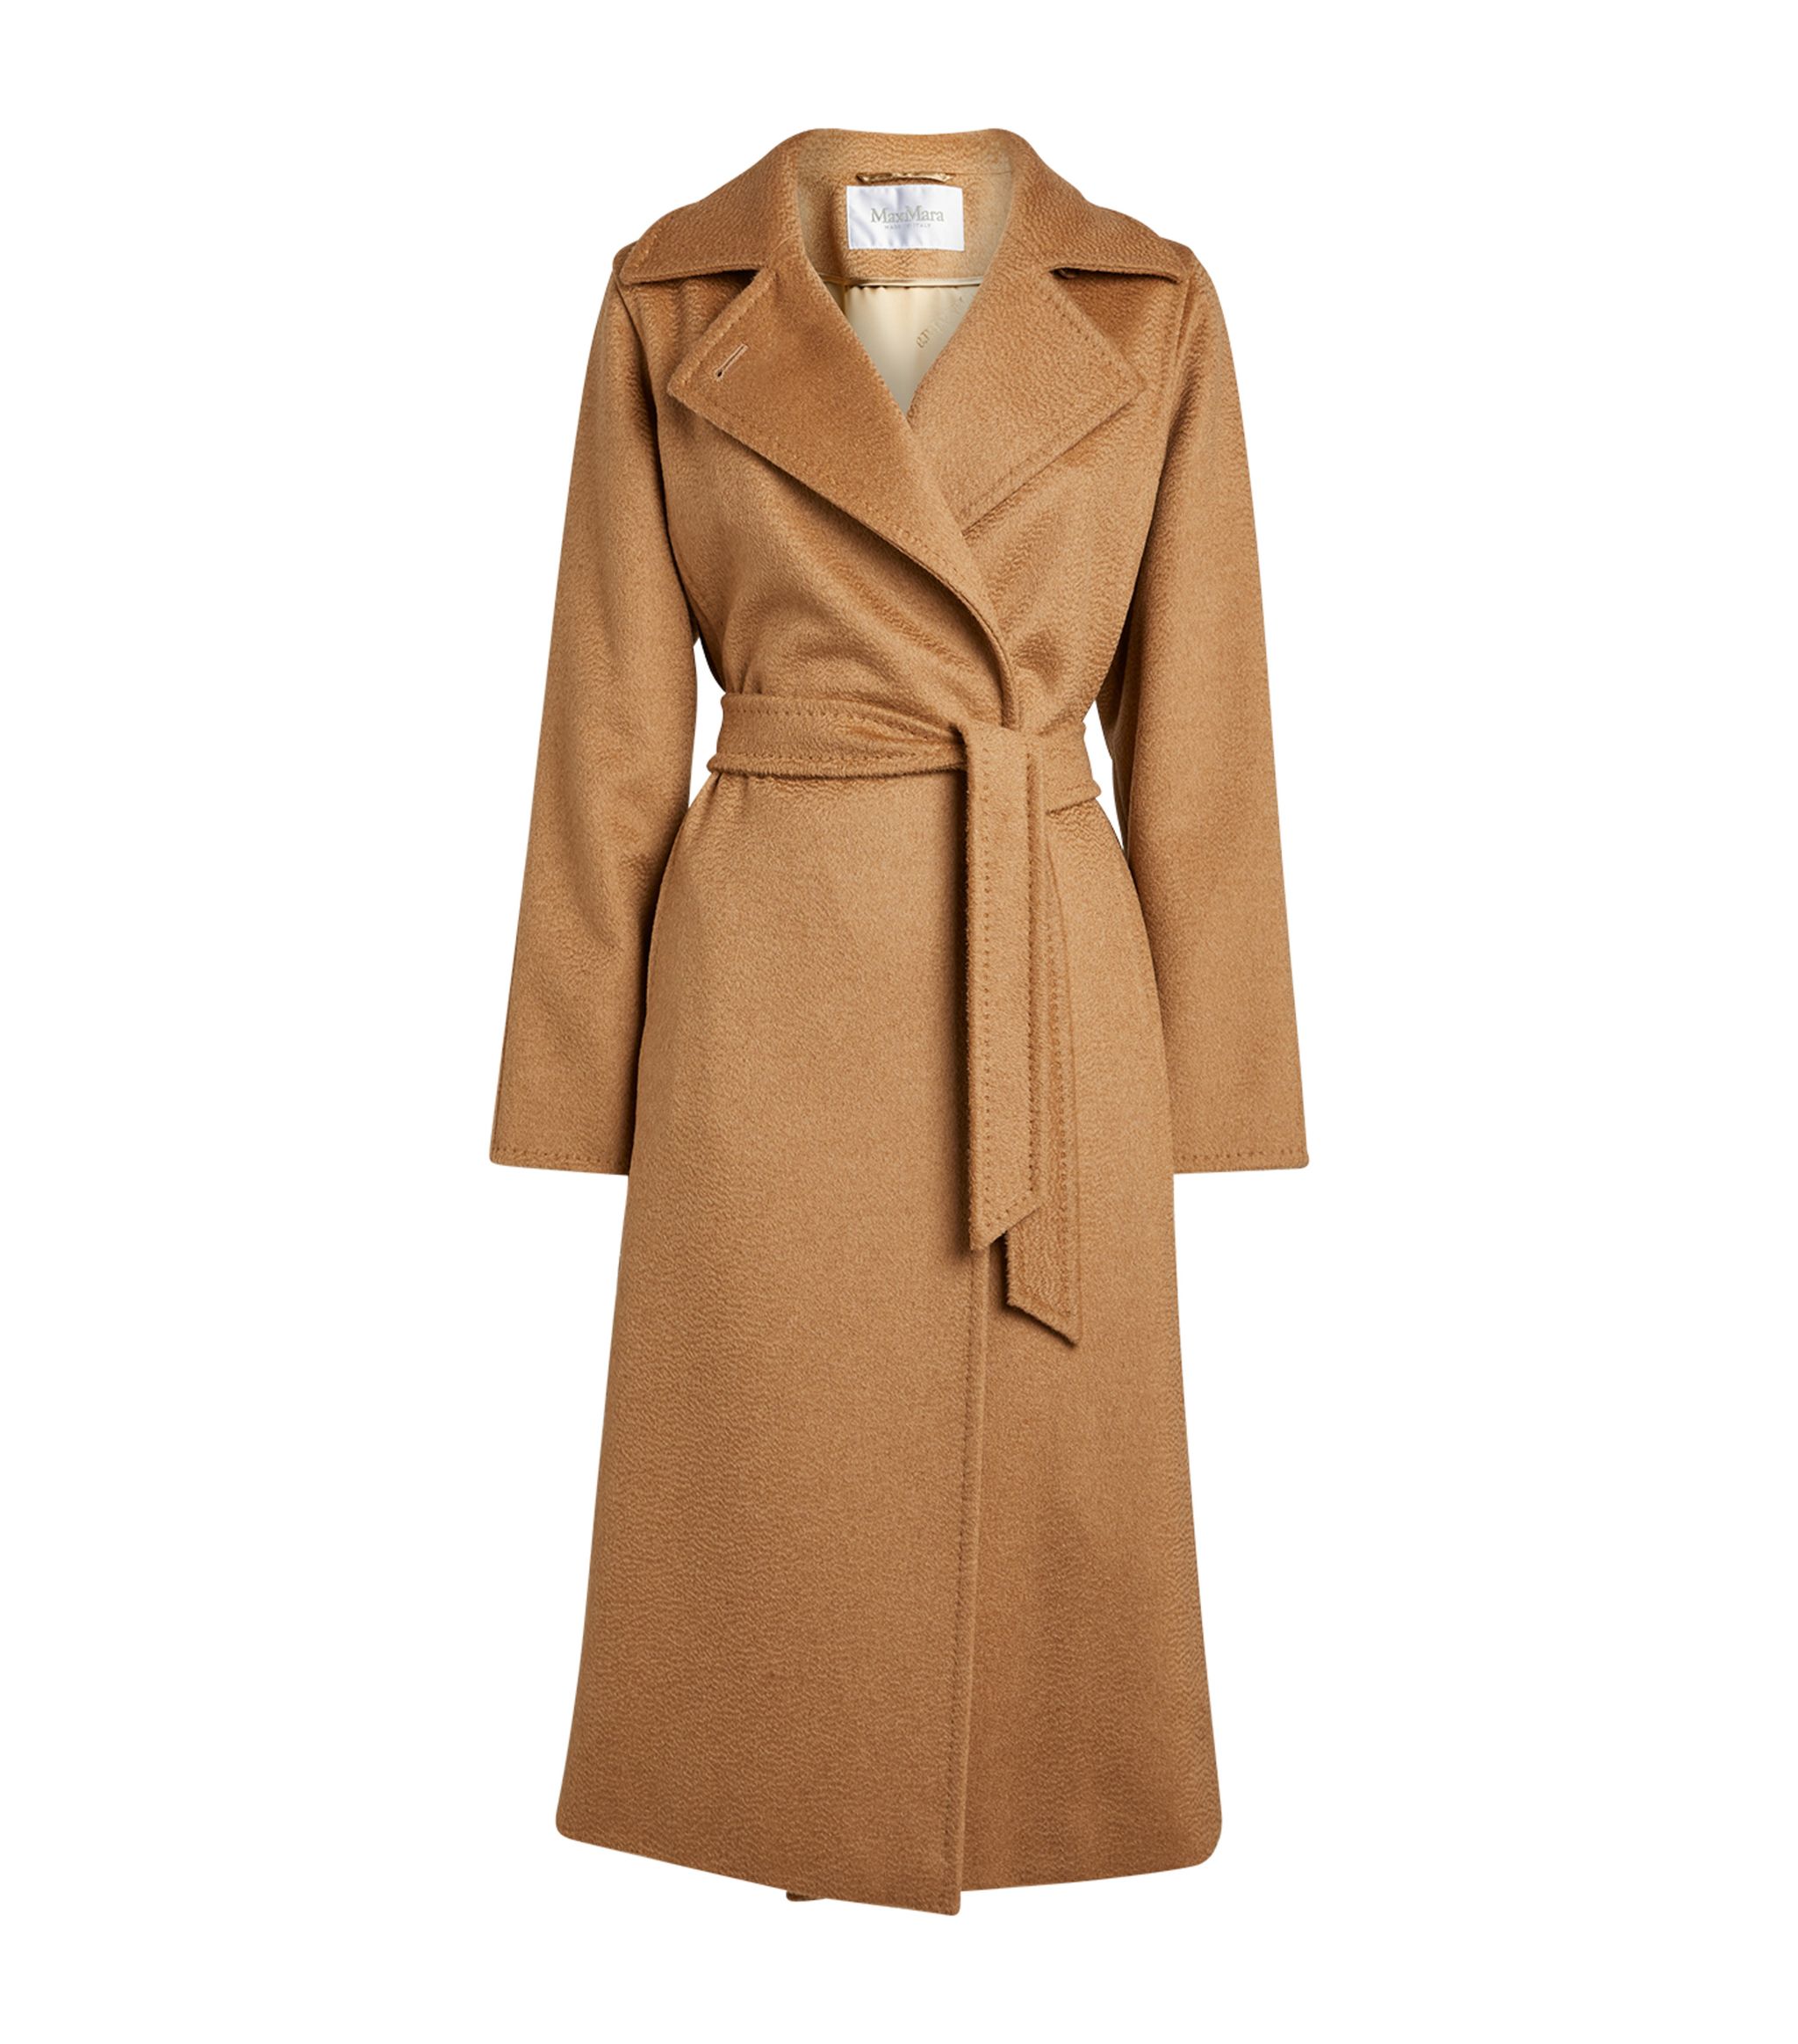 10-timeless-fashion-items-we-all-should-invest-in-max-mara-camel-coat